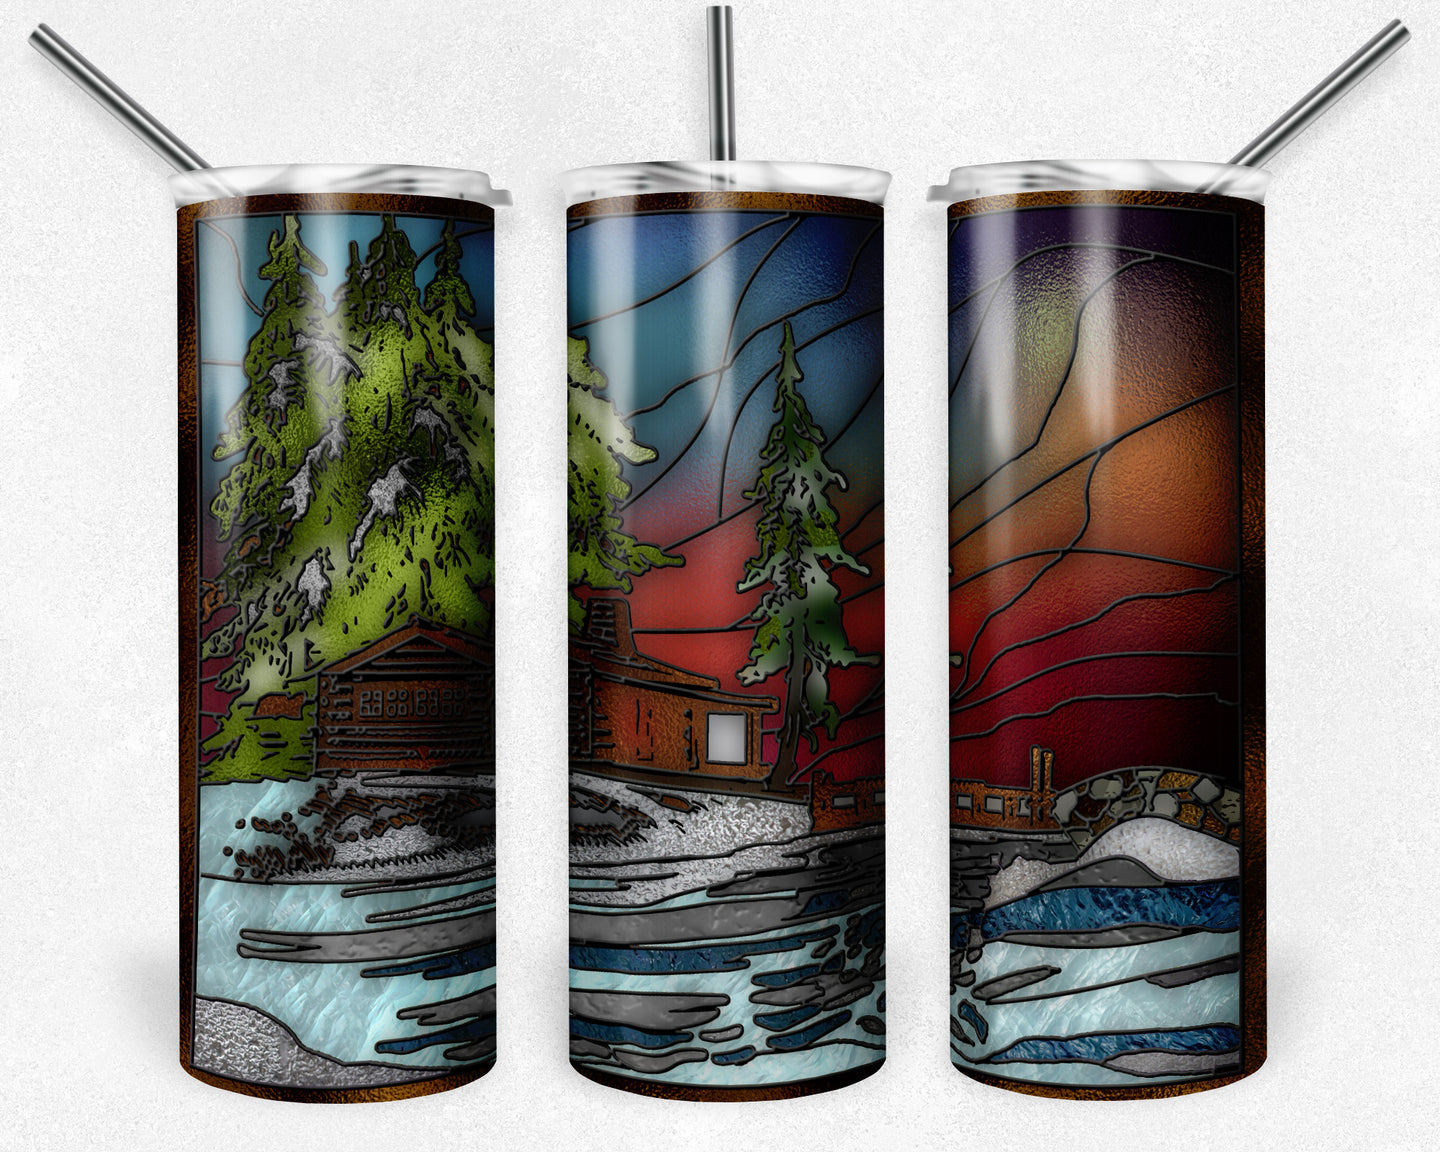 Log Cabin Winter Scene Stained Glass